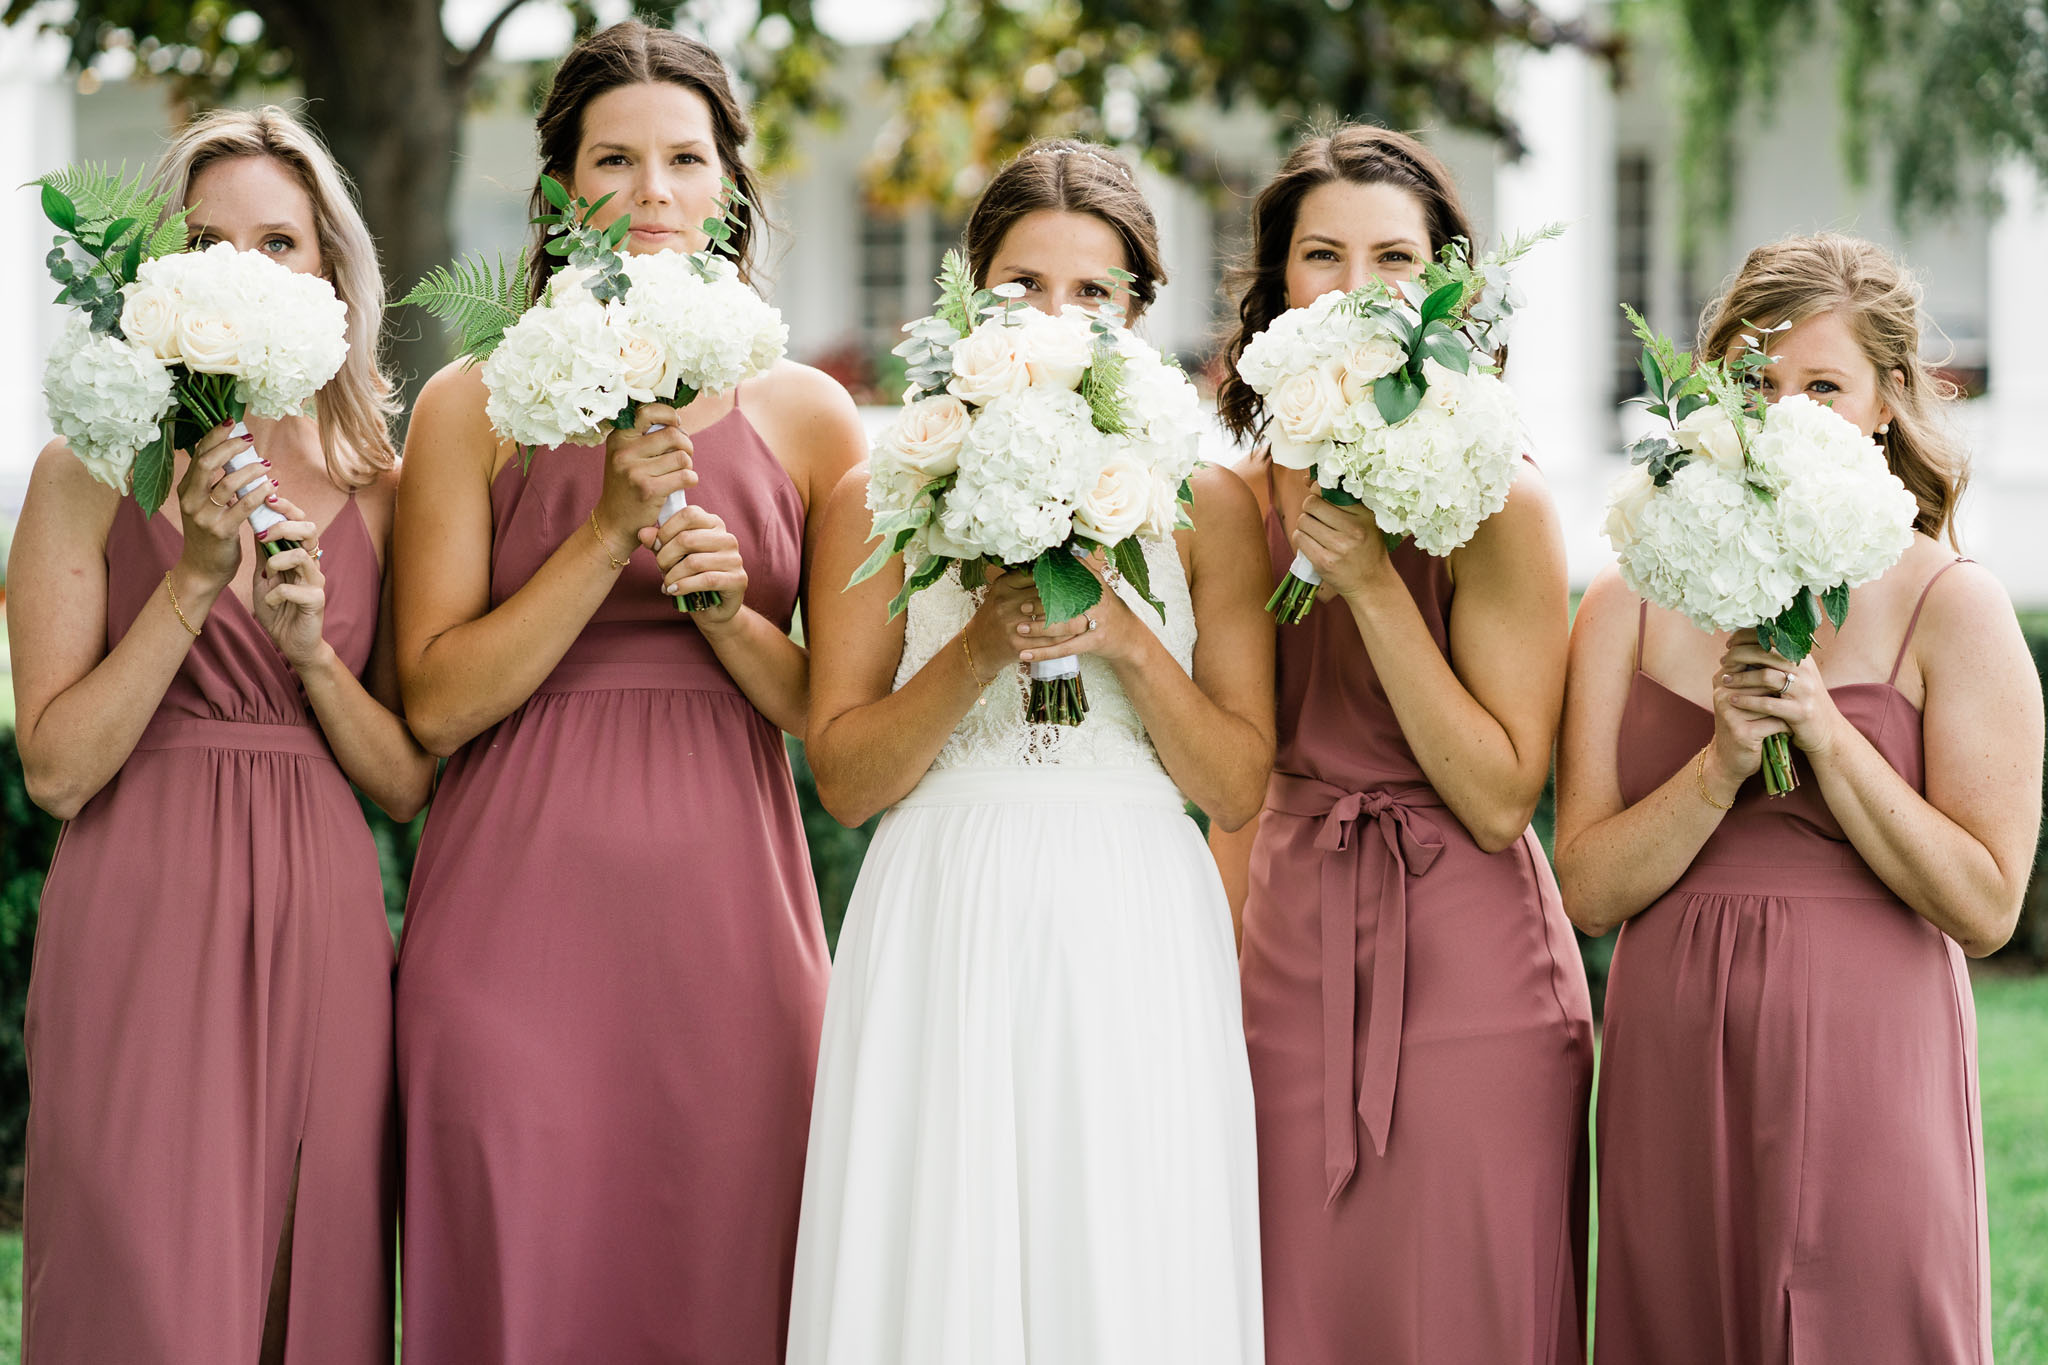 Bridesmaids all peaking out from behind their flowers.